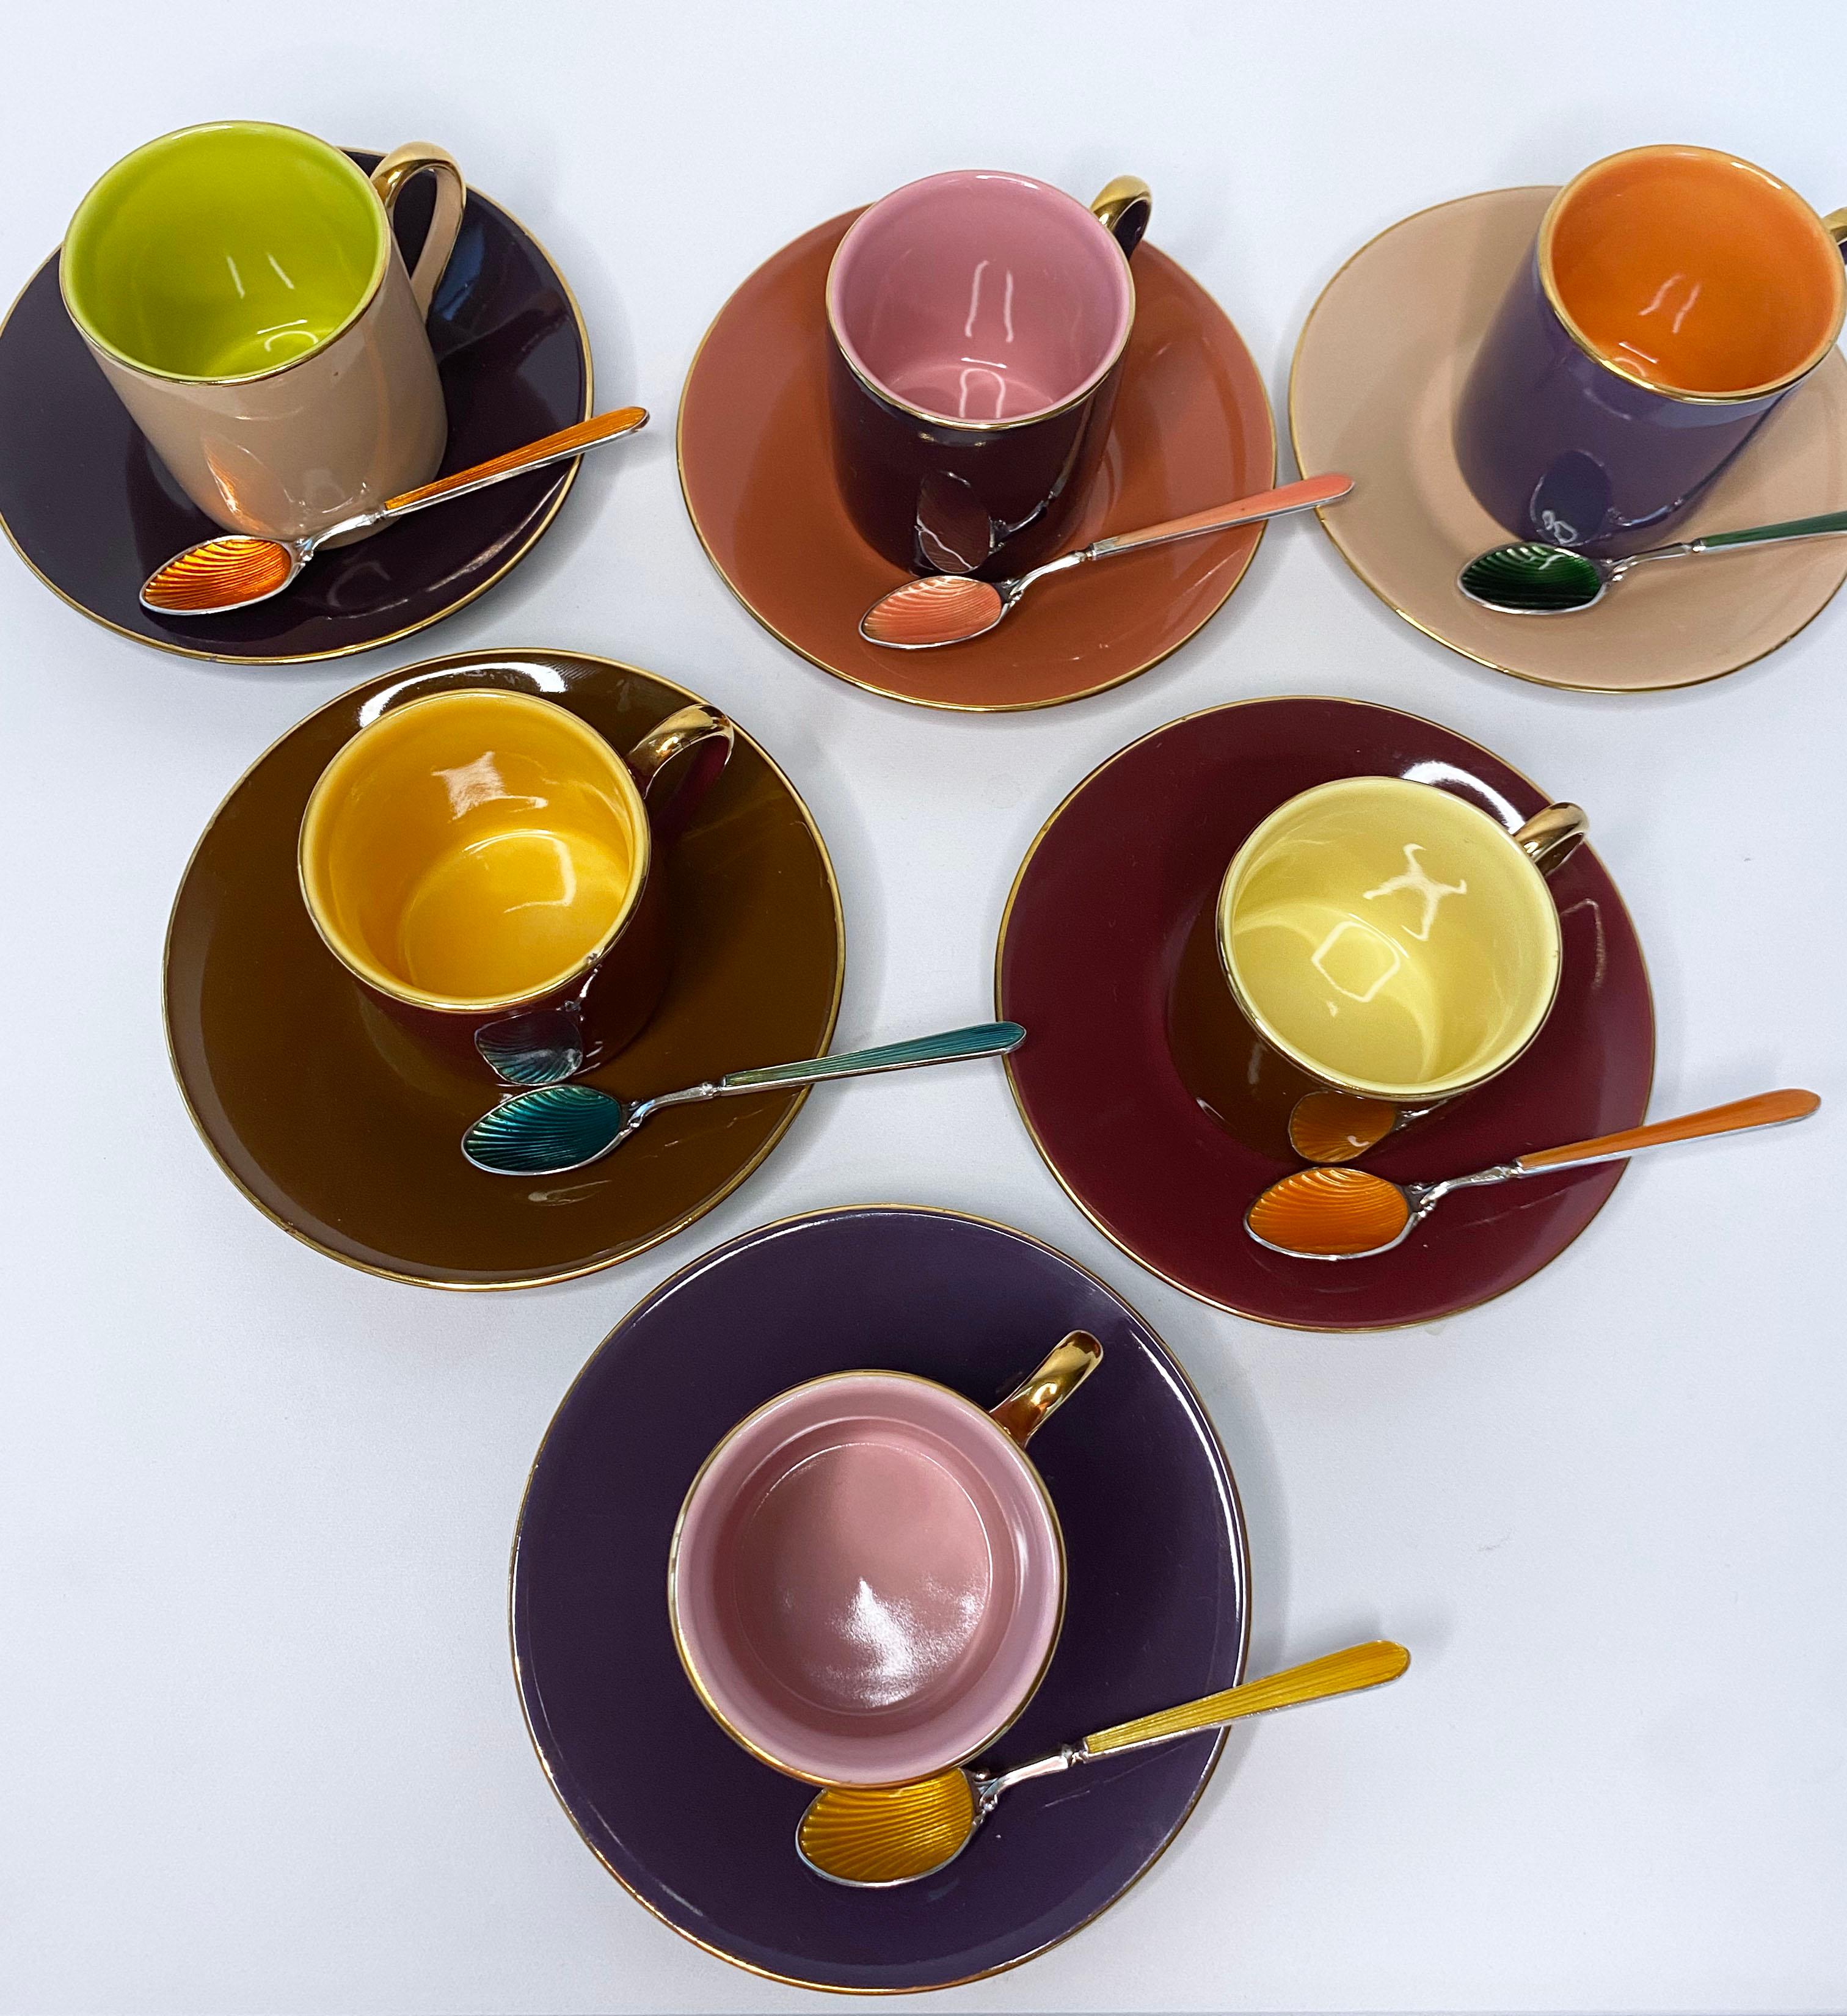 Fun yet Elegant multi colored Coffee Cup & Spoon Set. The Coffee Cups and Plates come in a set of 6 which showcase a beautiful warm complimentary palette that is easily paired among itself. A stunning set of never before used Vintage Enamel Spoons